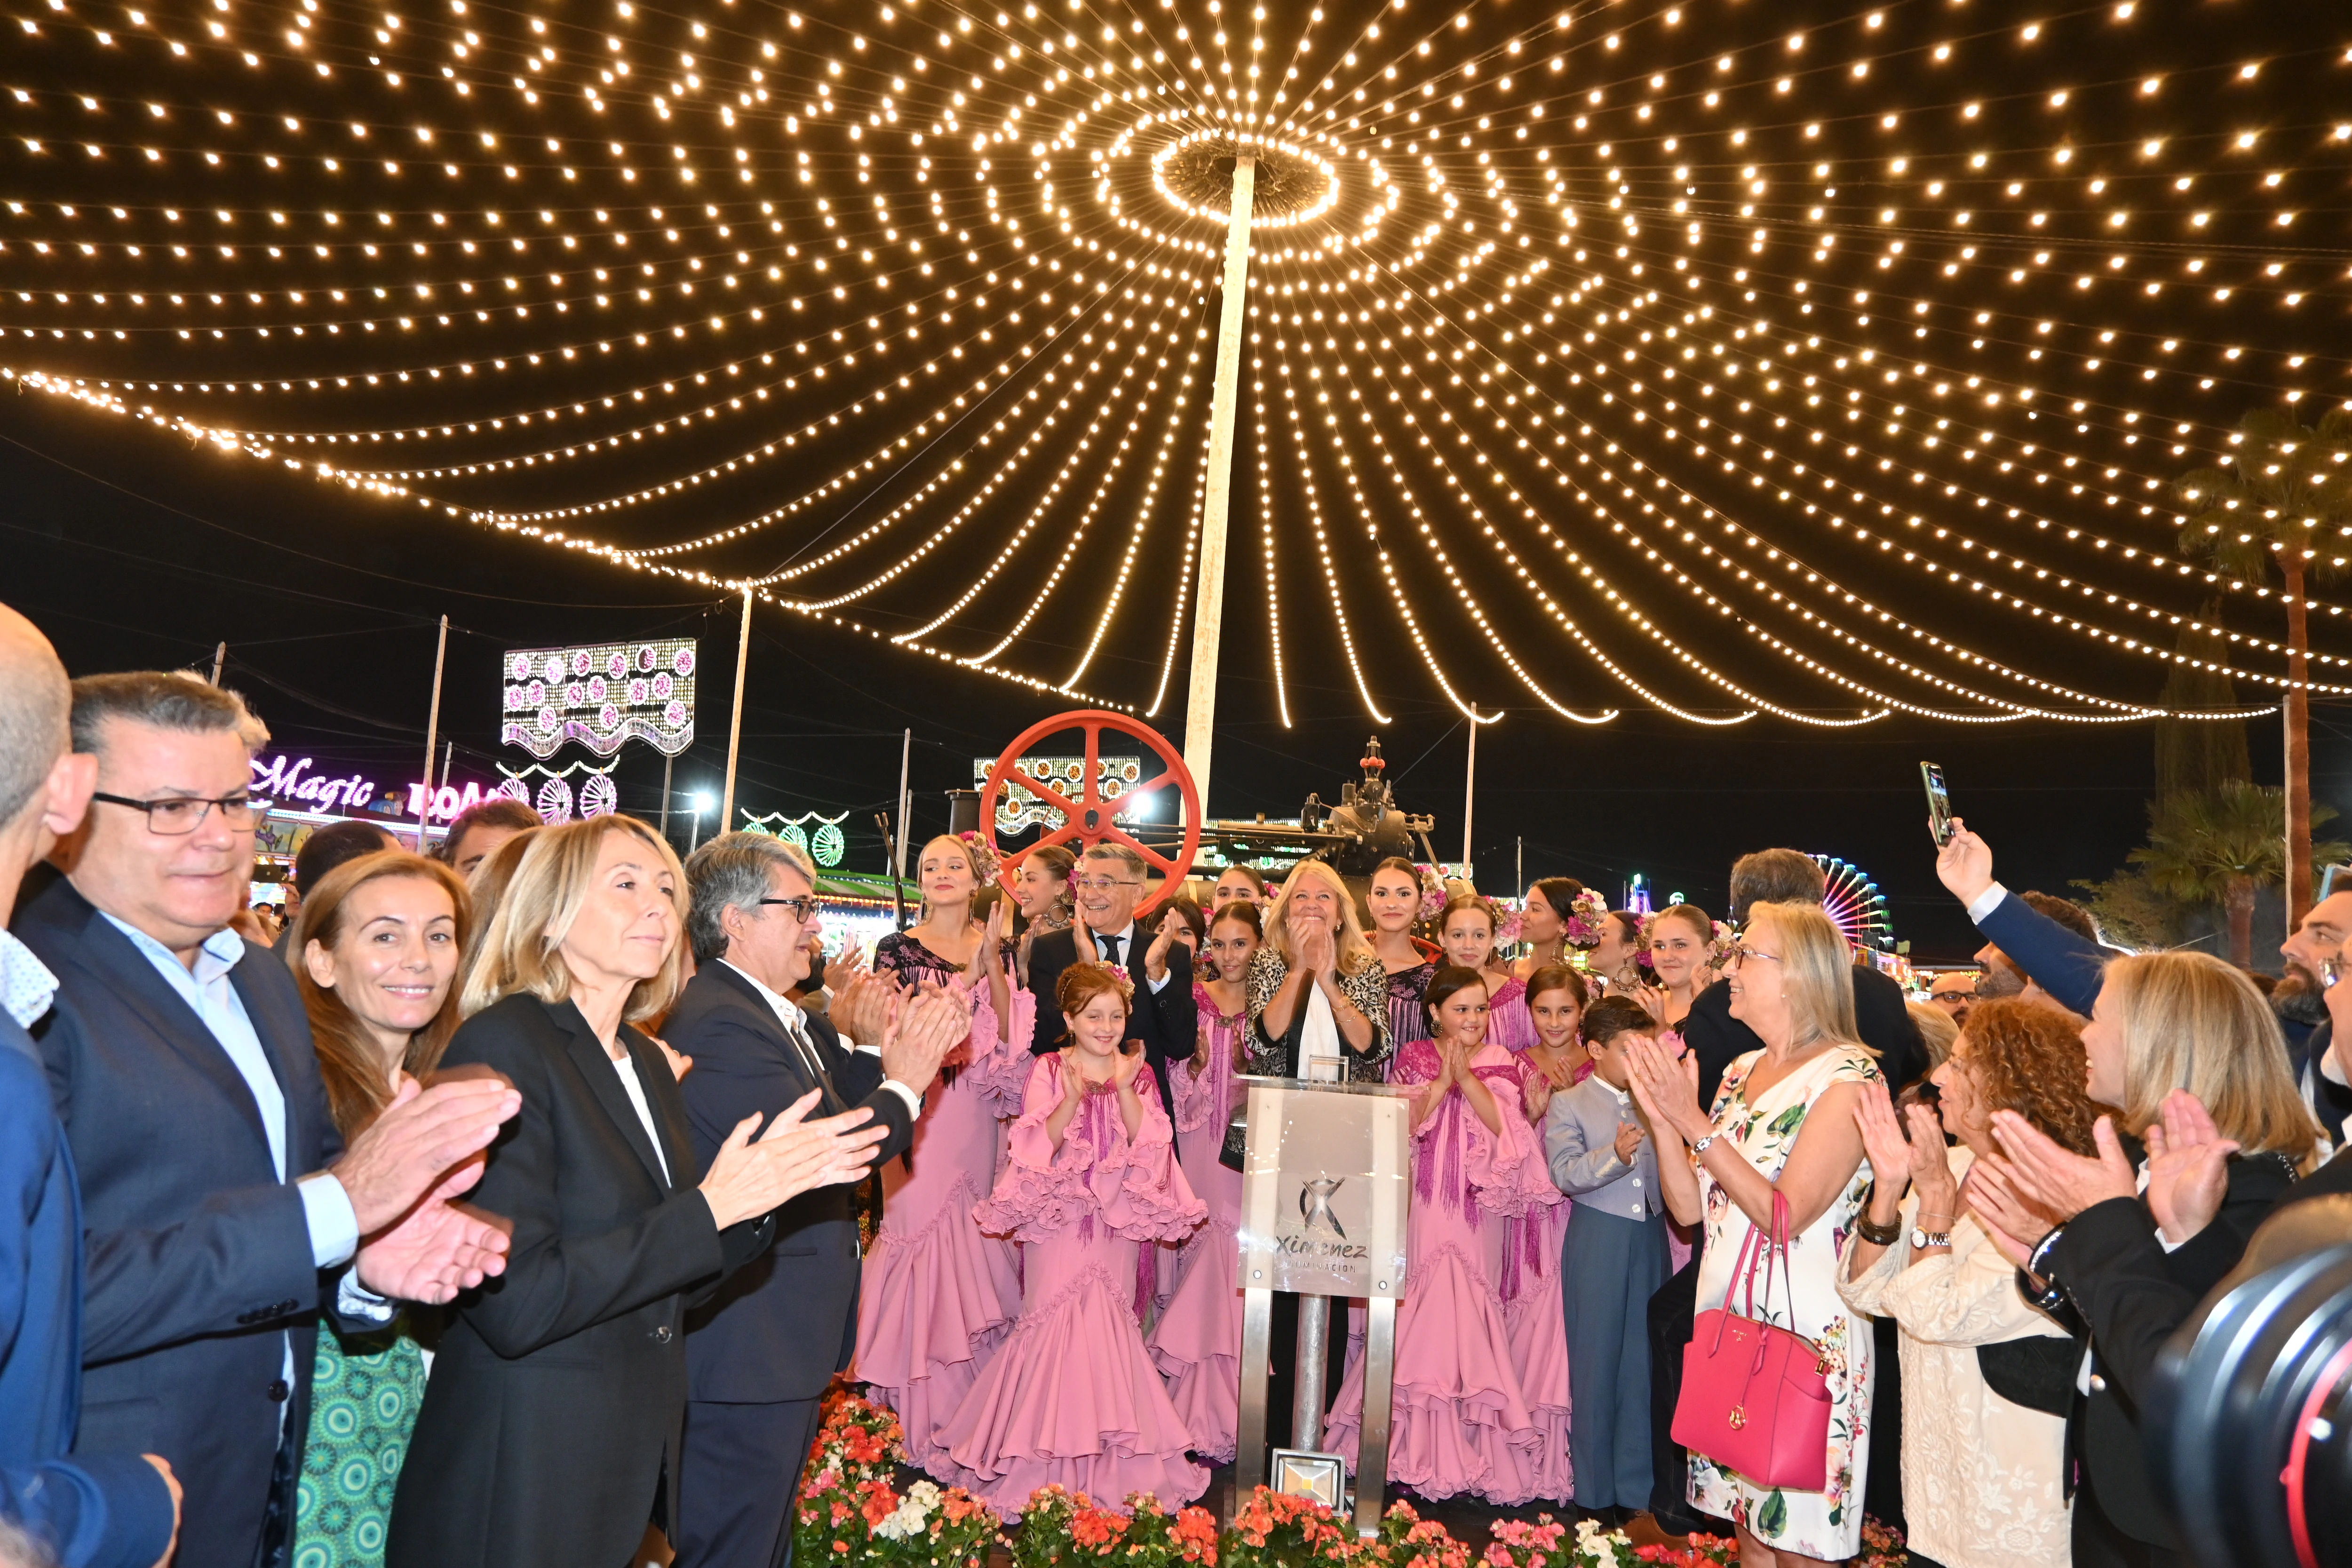 After a two-year hiatus, due to the Covid pandemic, the celebration was back in full swing at the town's new fairground